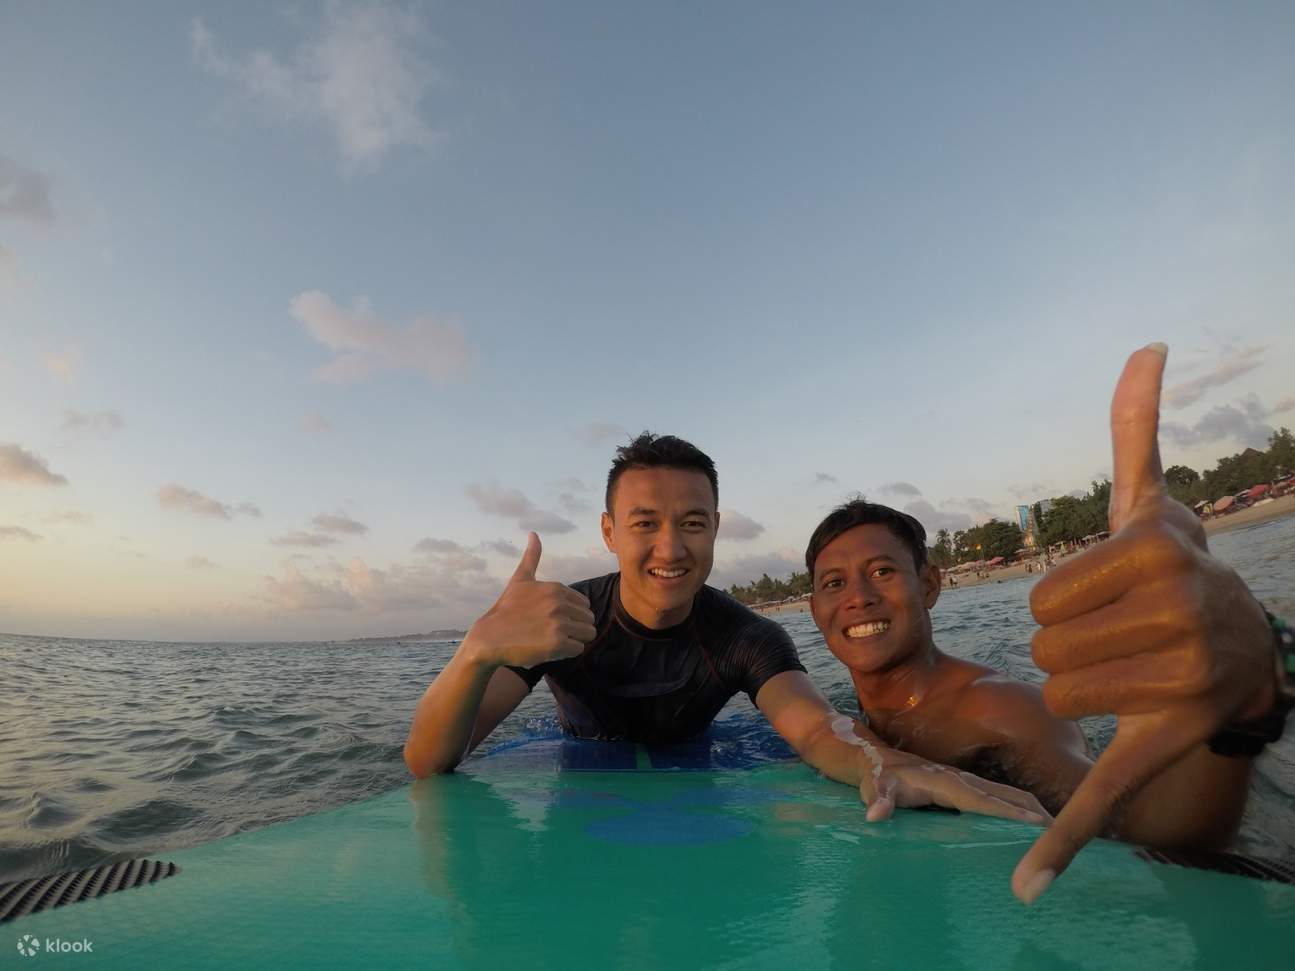 two men posing while holding a surf board